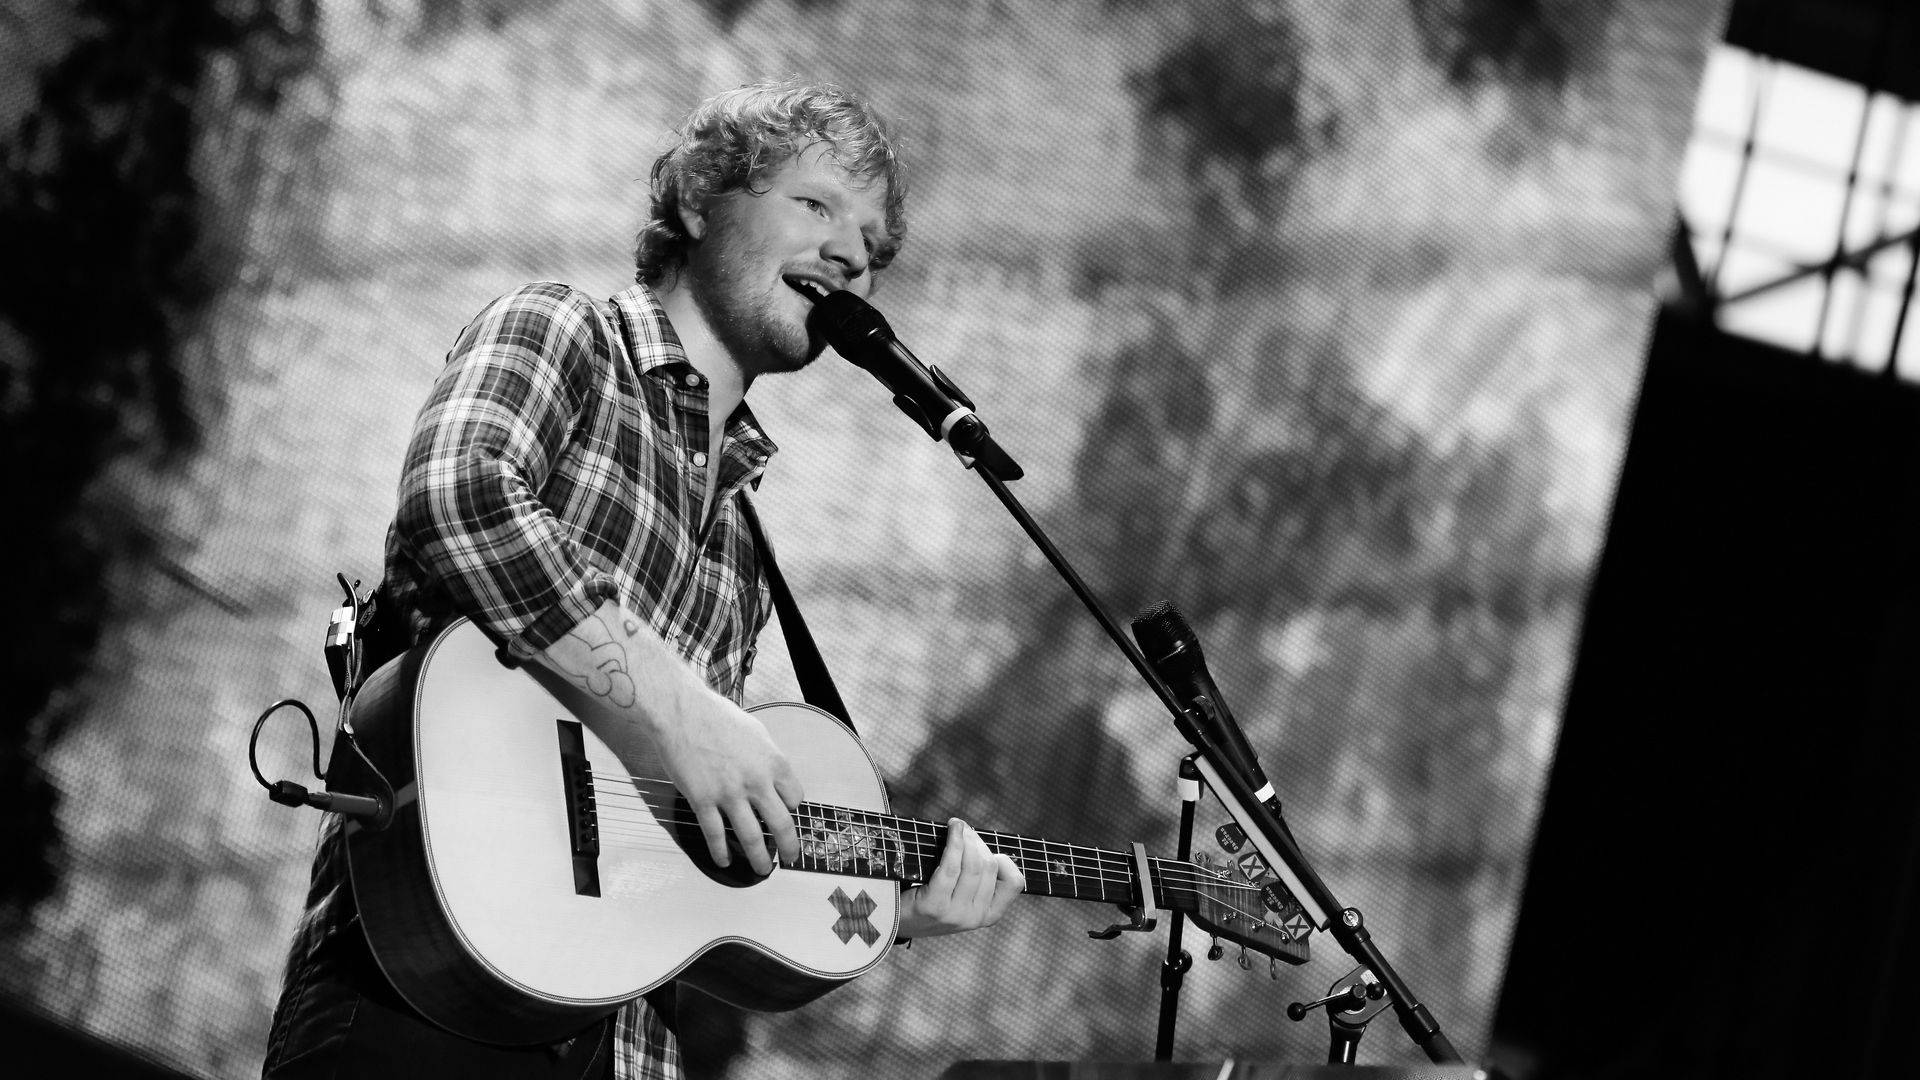 Ed Sheeran Performing On Stage Background